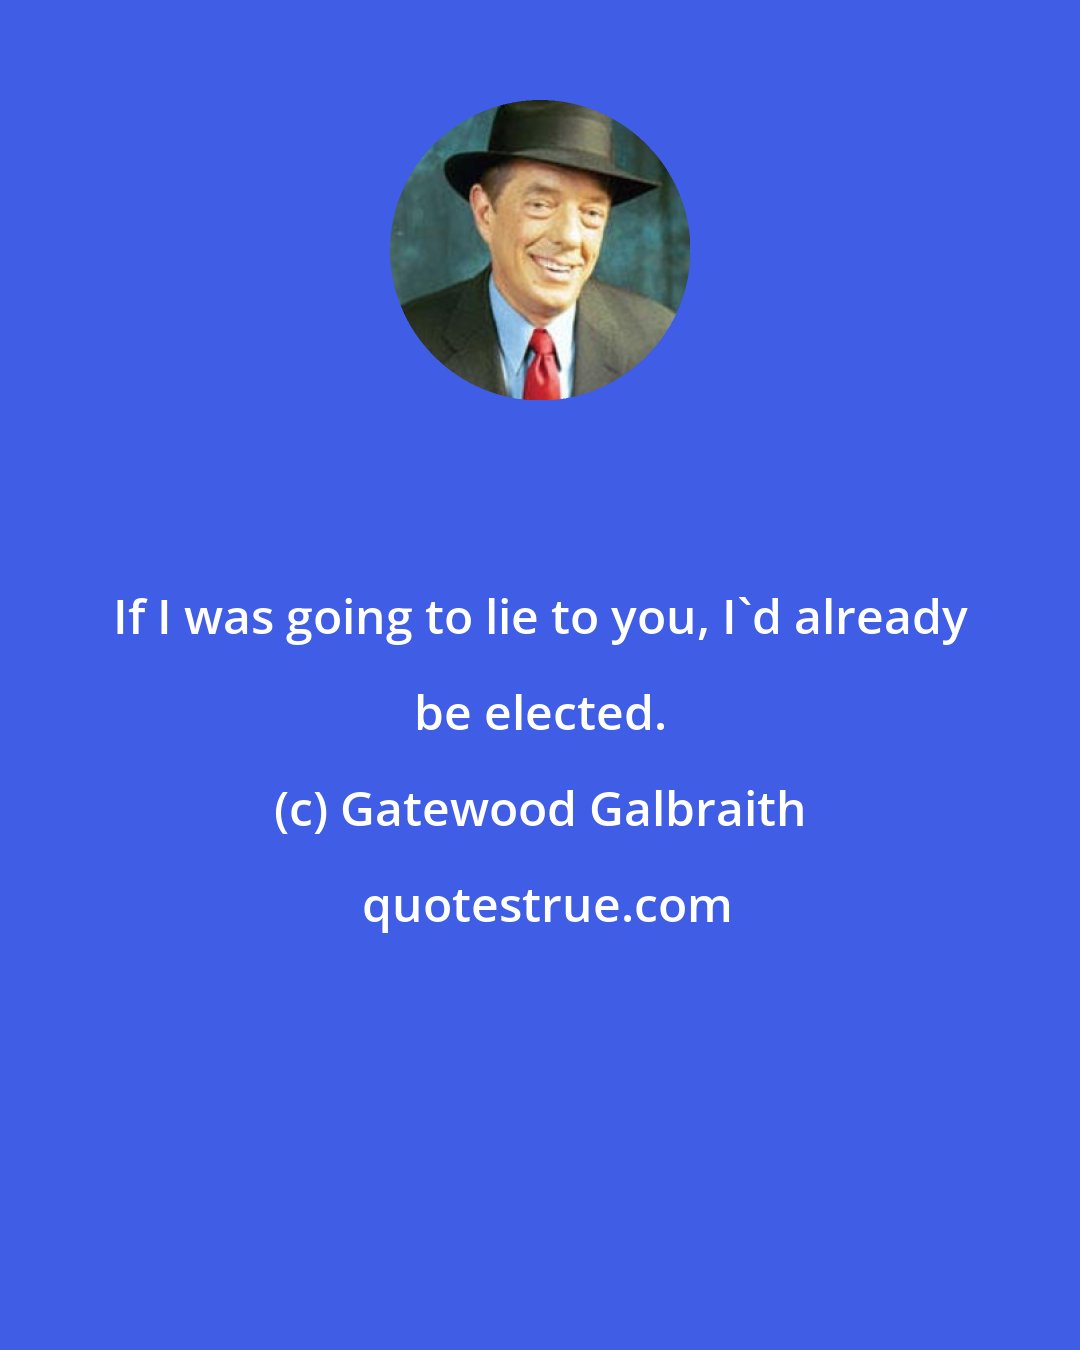 Gatewood Galbraith: If I was going to lie to you, I'd already be elected.